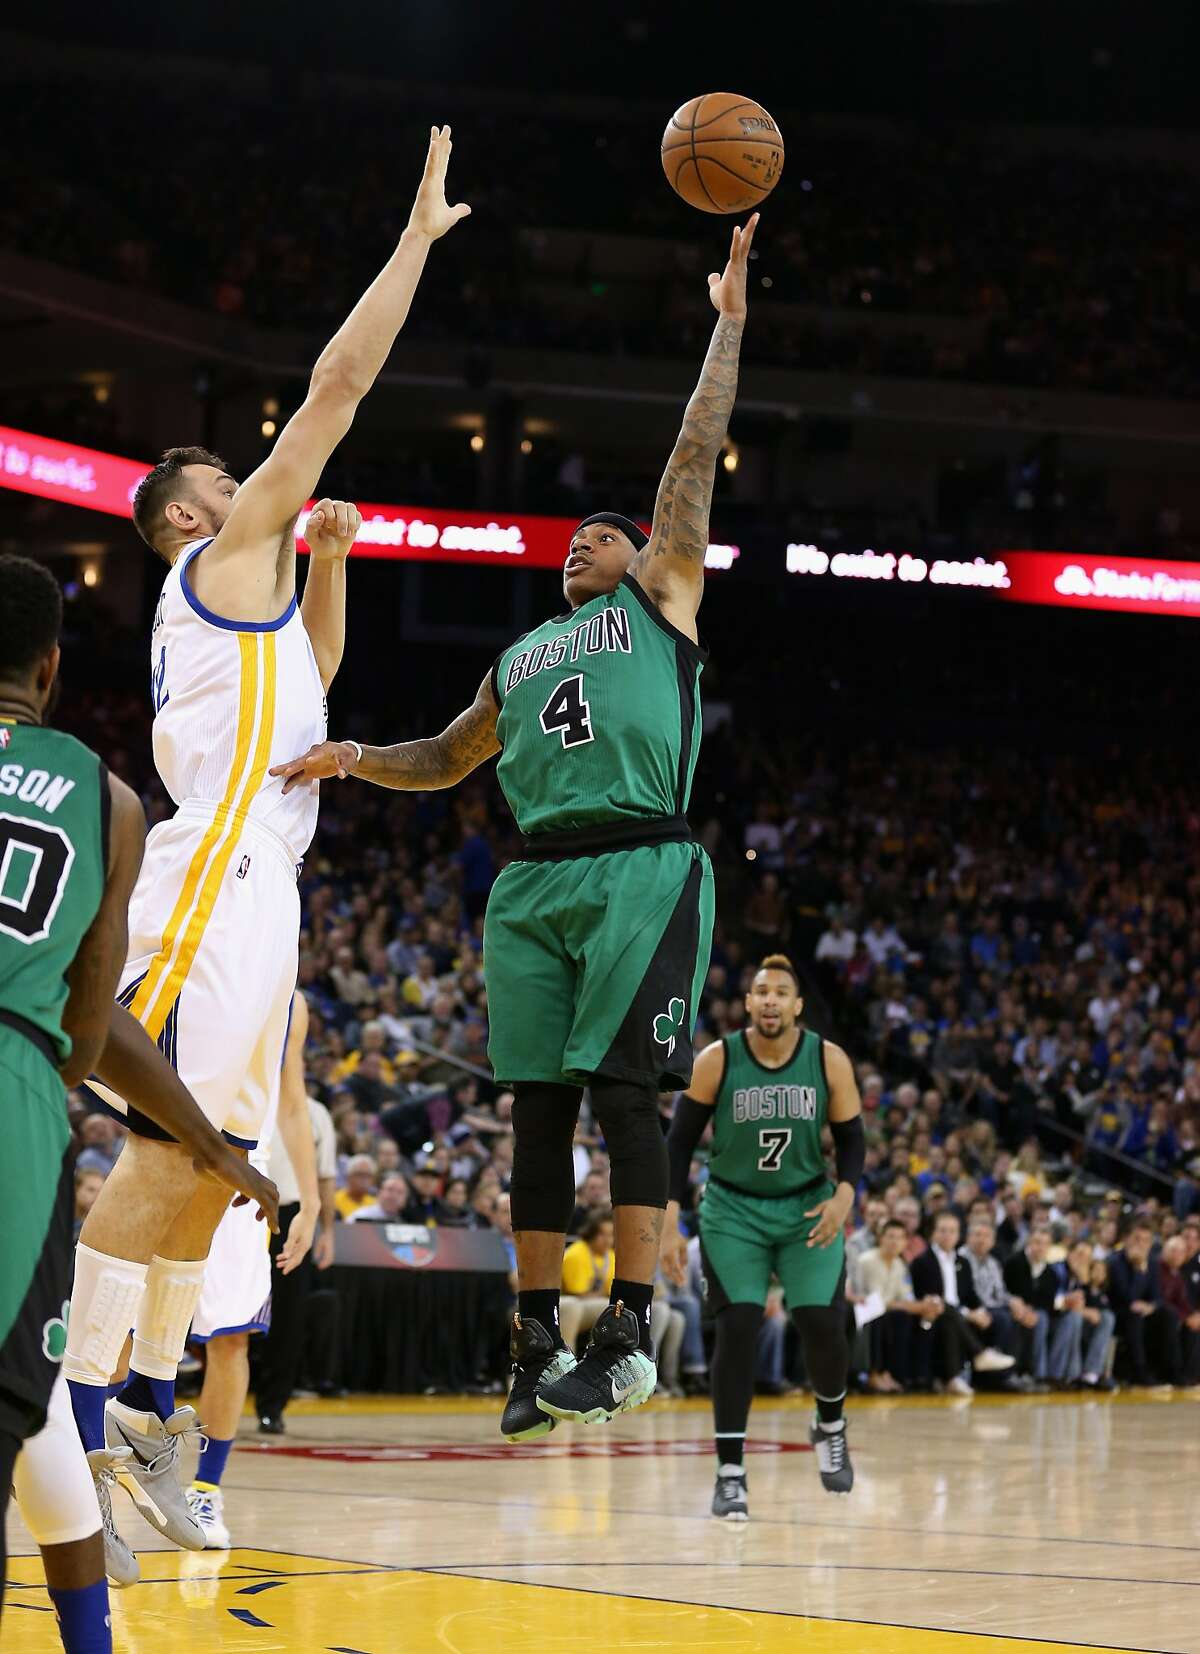 OAKLAND, CA - APRIL 01: Isaiah Thomas #4 of the Boston Celtics shoots over Andrew Bogut at ORACLE Arena on April 1, 2016 in Oakland, California. NOTE TO USER: User expressly acknowledges and agrees that, by downloading and or using this photograph, User is consenting to the terms and conditions of the Getty Images License Agreement. (Photo by Ezra Shaw/Getty Images)